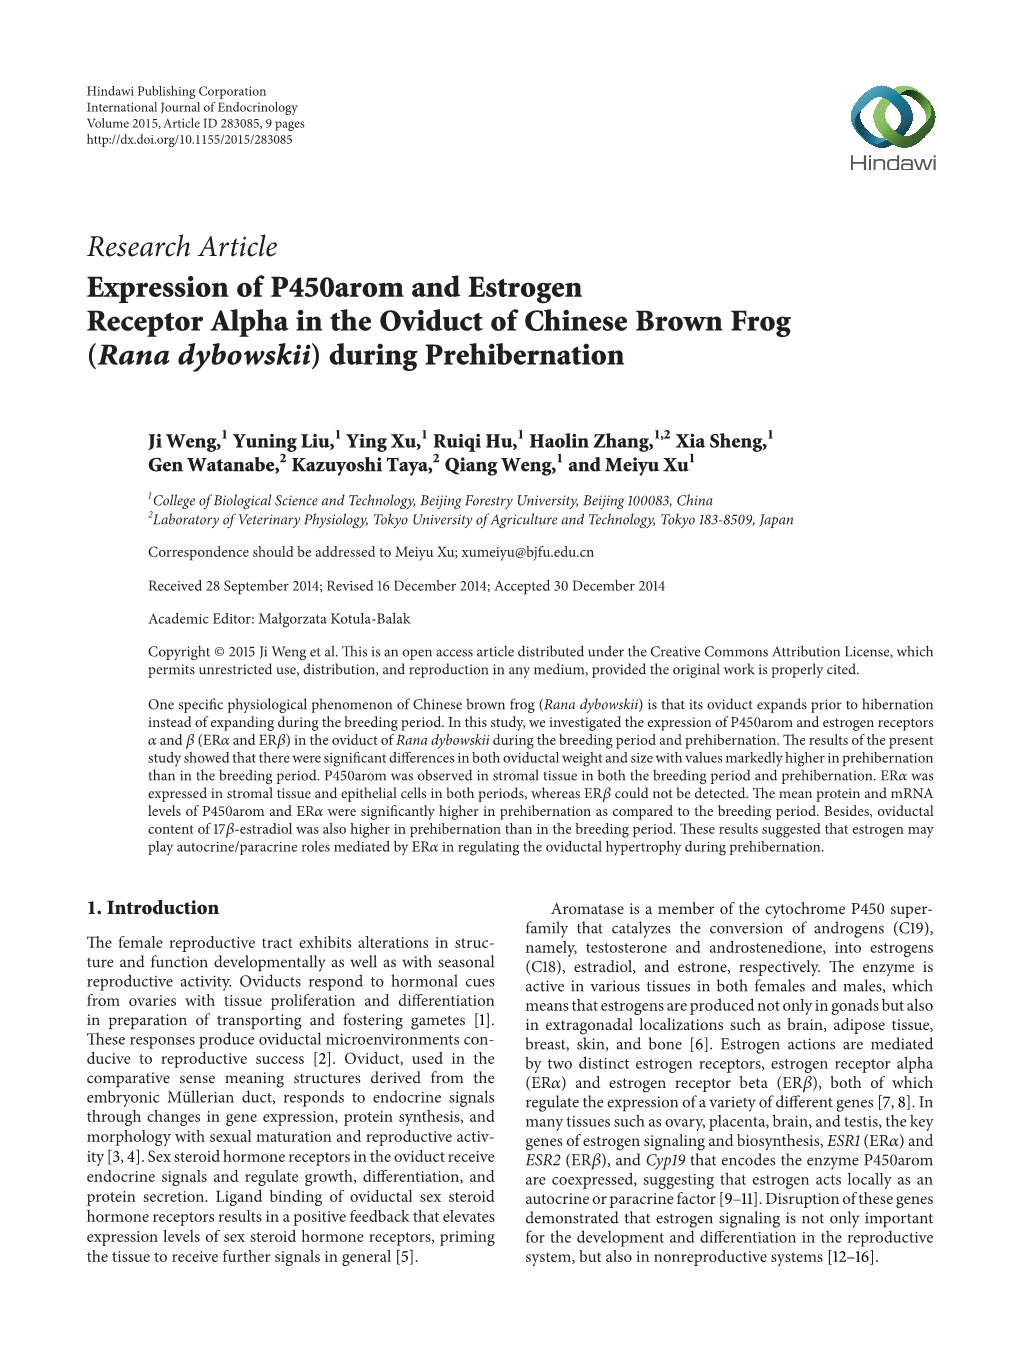 Research Article Expression of P450arom and Estrogen Receptor Alpha in the Oviduct of Chinese Brown Frog (Rana Dybowskii) During Prehibernation